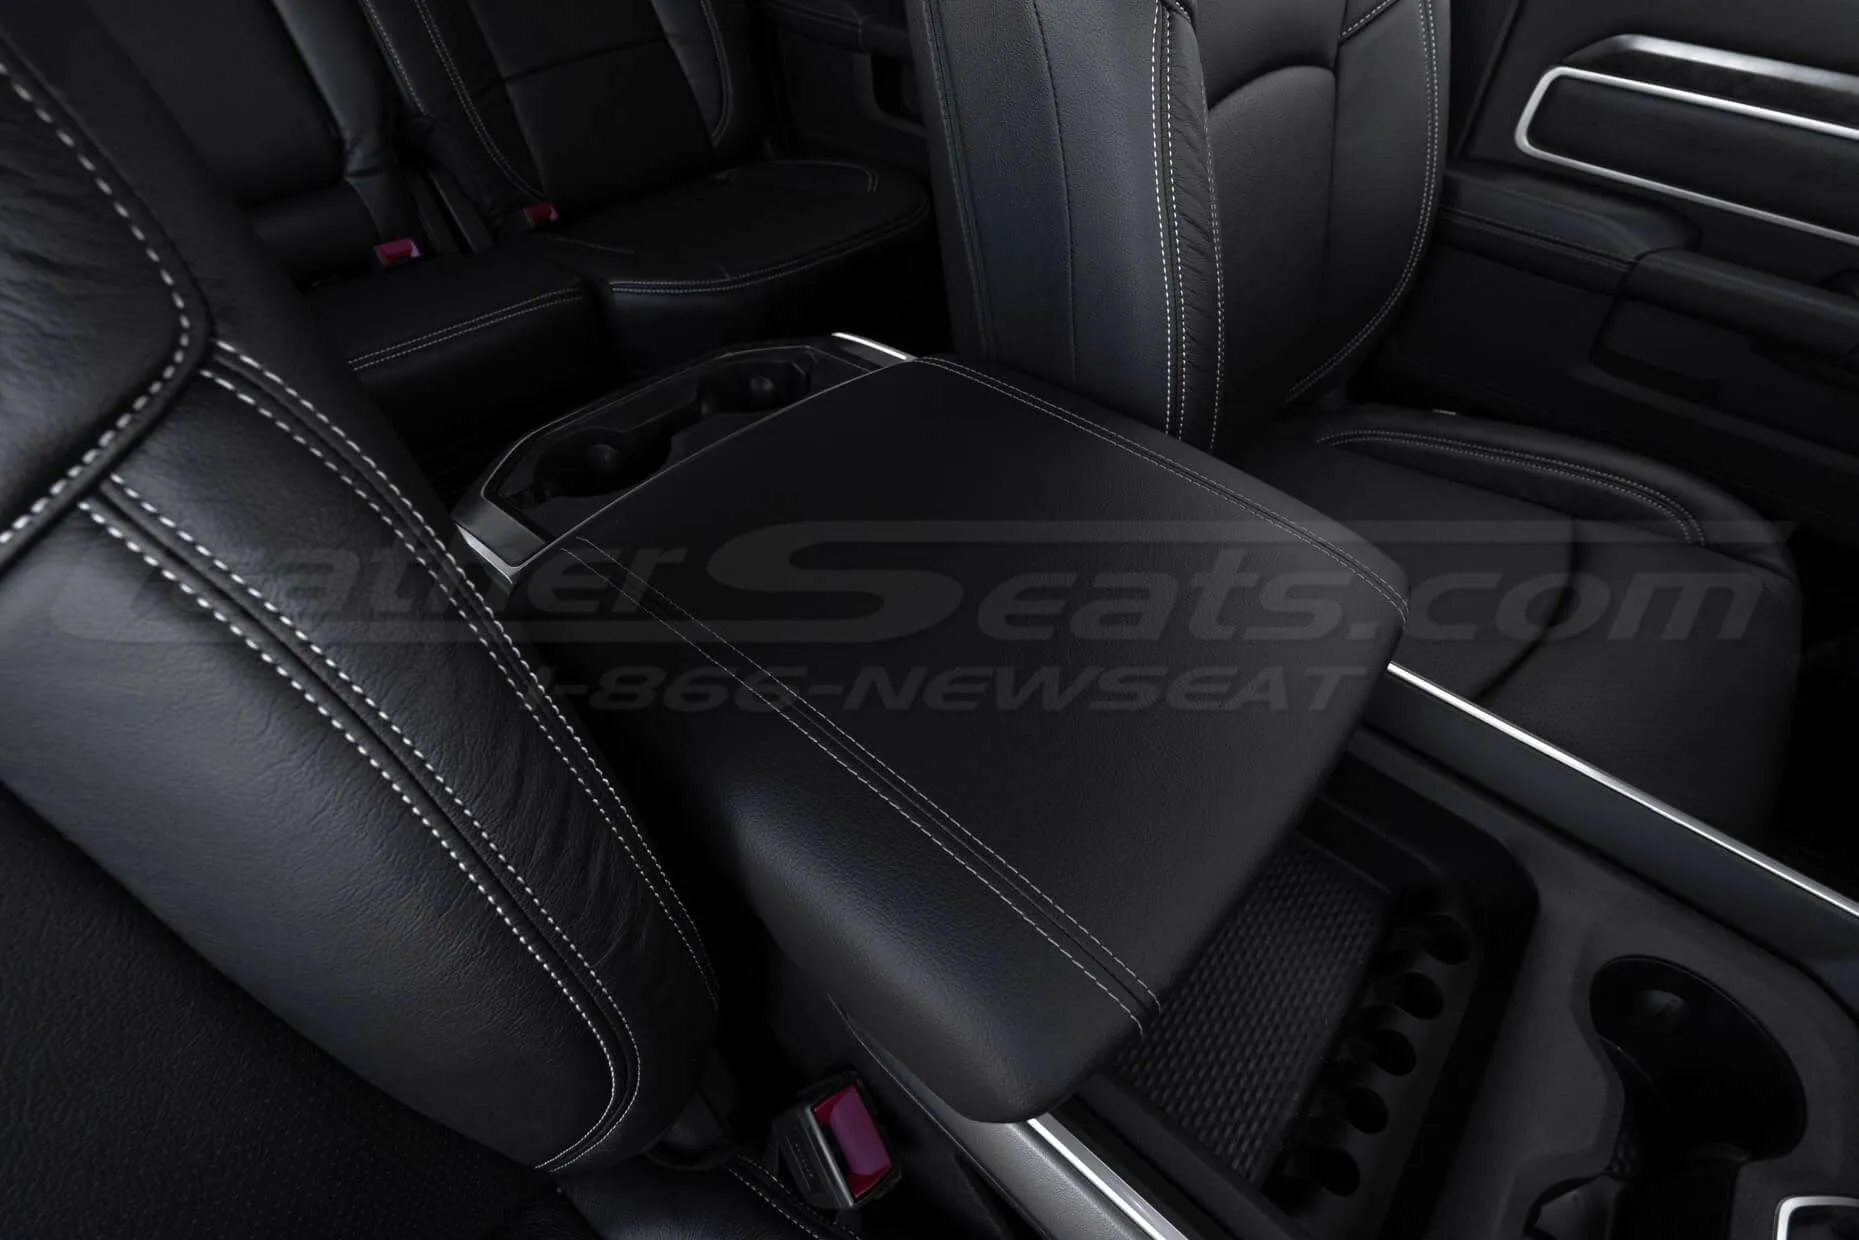 Close-up view of 2019-2022 Dodge Ram Console Lid cover in Black leather